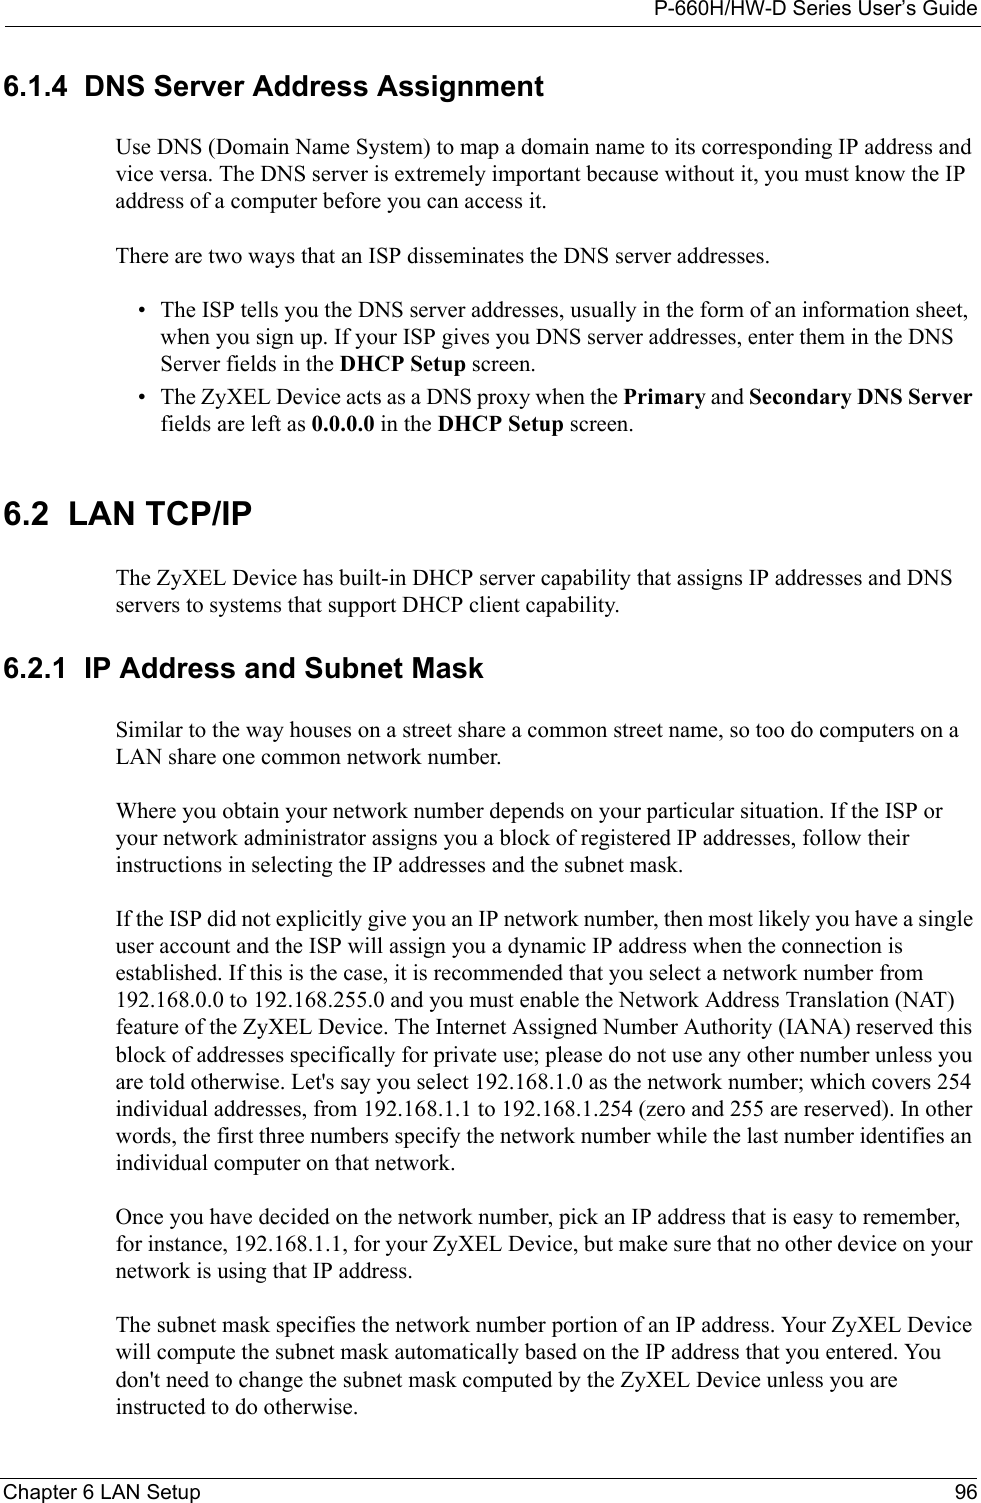 P-660H/HW-D Series User’s GuideChapter 6 LAN Setup 966.1.4  DNS Server Address AssignmentUse DNS (Domain Name System) to map a domain name to its corresponding IP address and vice versa. The DNS server is extremely important because without it, you must know the IP address of a computer before you can access it. There are two ways that an ISP disseminates the DNS server addresses. • The ISP tells you the DNS server addresses, usually in the form of an information sheet, when you sign up. If your ISP gives you DNS server addresses, enter them in the DNS Server fields in the DHCP Setup screen.• The ZyXEL Device acts as a DNS proxy when the Primary and Secondary DNS Server fields are left as 0.0.0.0 in the DHCP Setup screen.6.2  LAN TCP/IP The ZyXEL Device has built-in DHCP server capability that assigns IP addresses and DNS servers to systems that support DHCP client capability.6.2.1  IP Address and Subnet MaskSimilar to the way houses on a street share a common street name, so too do computers on a LAN share one common network number.Where you obtain your network number depends on your particular situation. If the ISP or your network administrator assigns you a block of registered IP addresses, follow their instructions in selecting the IP addresses and the subnet mask.If the ISP did not explicitly give you an IP network number, then most likely you have a single user account and the ISP will assign you a dynamic IP address when the connection is established. If this is the case, it is recommended that you select a network number from 192.168.0.0 to 192.168.255.0 and you must enable the Network Address Translation (NAT) feature of the ZyXEL Device. The Internet Assigned Number Authority (IANA) reserved this block of addresses specifically for private use; please do not use any other number unless you are told otherwise. Let&apos;s say you select 192.168.1.0 as the network number; which covers 254 individual addresses, from 192.168.1.1 to 192.168.1.254 (zero and 255 are reserved). In other words, the first three numbers specify the network number while the last number identifies an individual computer on that network.Once you have decided on the network number, pick an IP address that is easy to remember, for instance, 192.168.1.1, for your ZyXEL Device, but make sure that no other device on your network is using that IP address.The subnet mask specifies the network number portion of an IP address. Your ZyXEL Device will compute the subnet mask automatically based on the IP address that you entered. You don&apos;t need to change the subnet mask computed by the ZyXEL Device unless you are instructed to do otherwise.